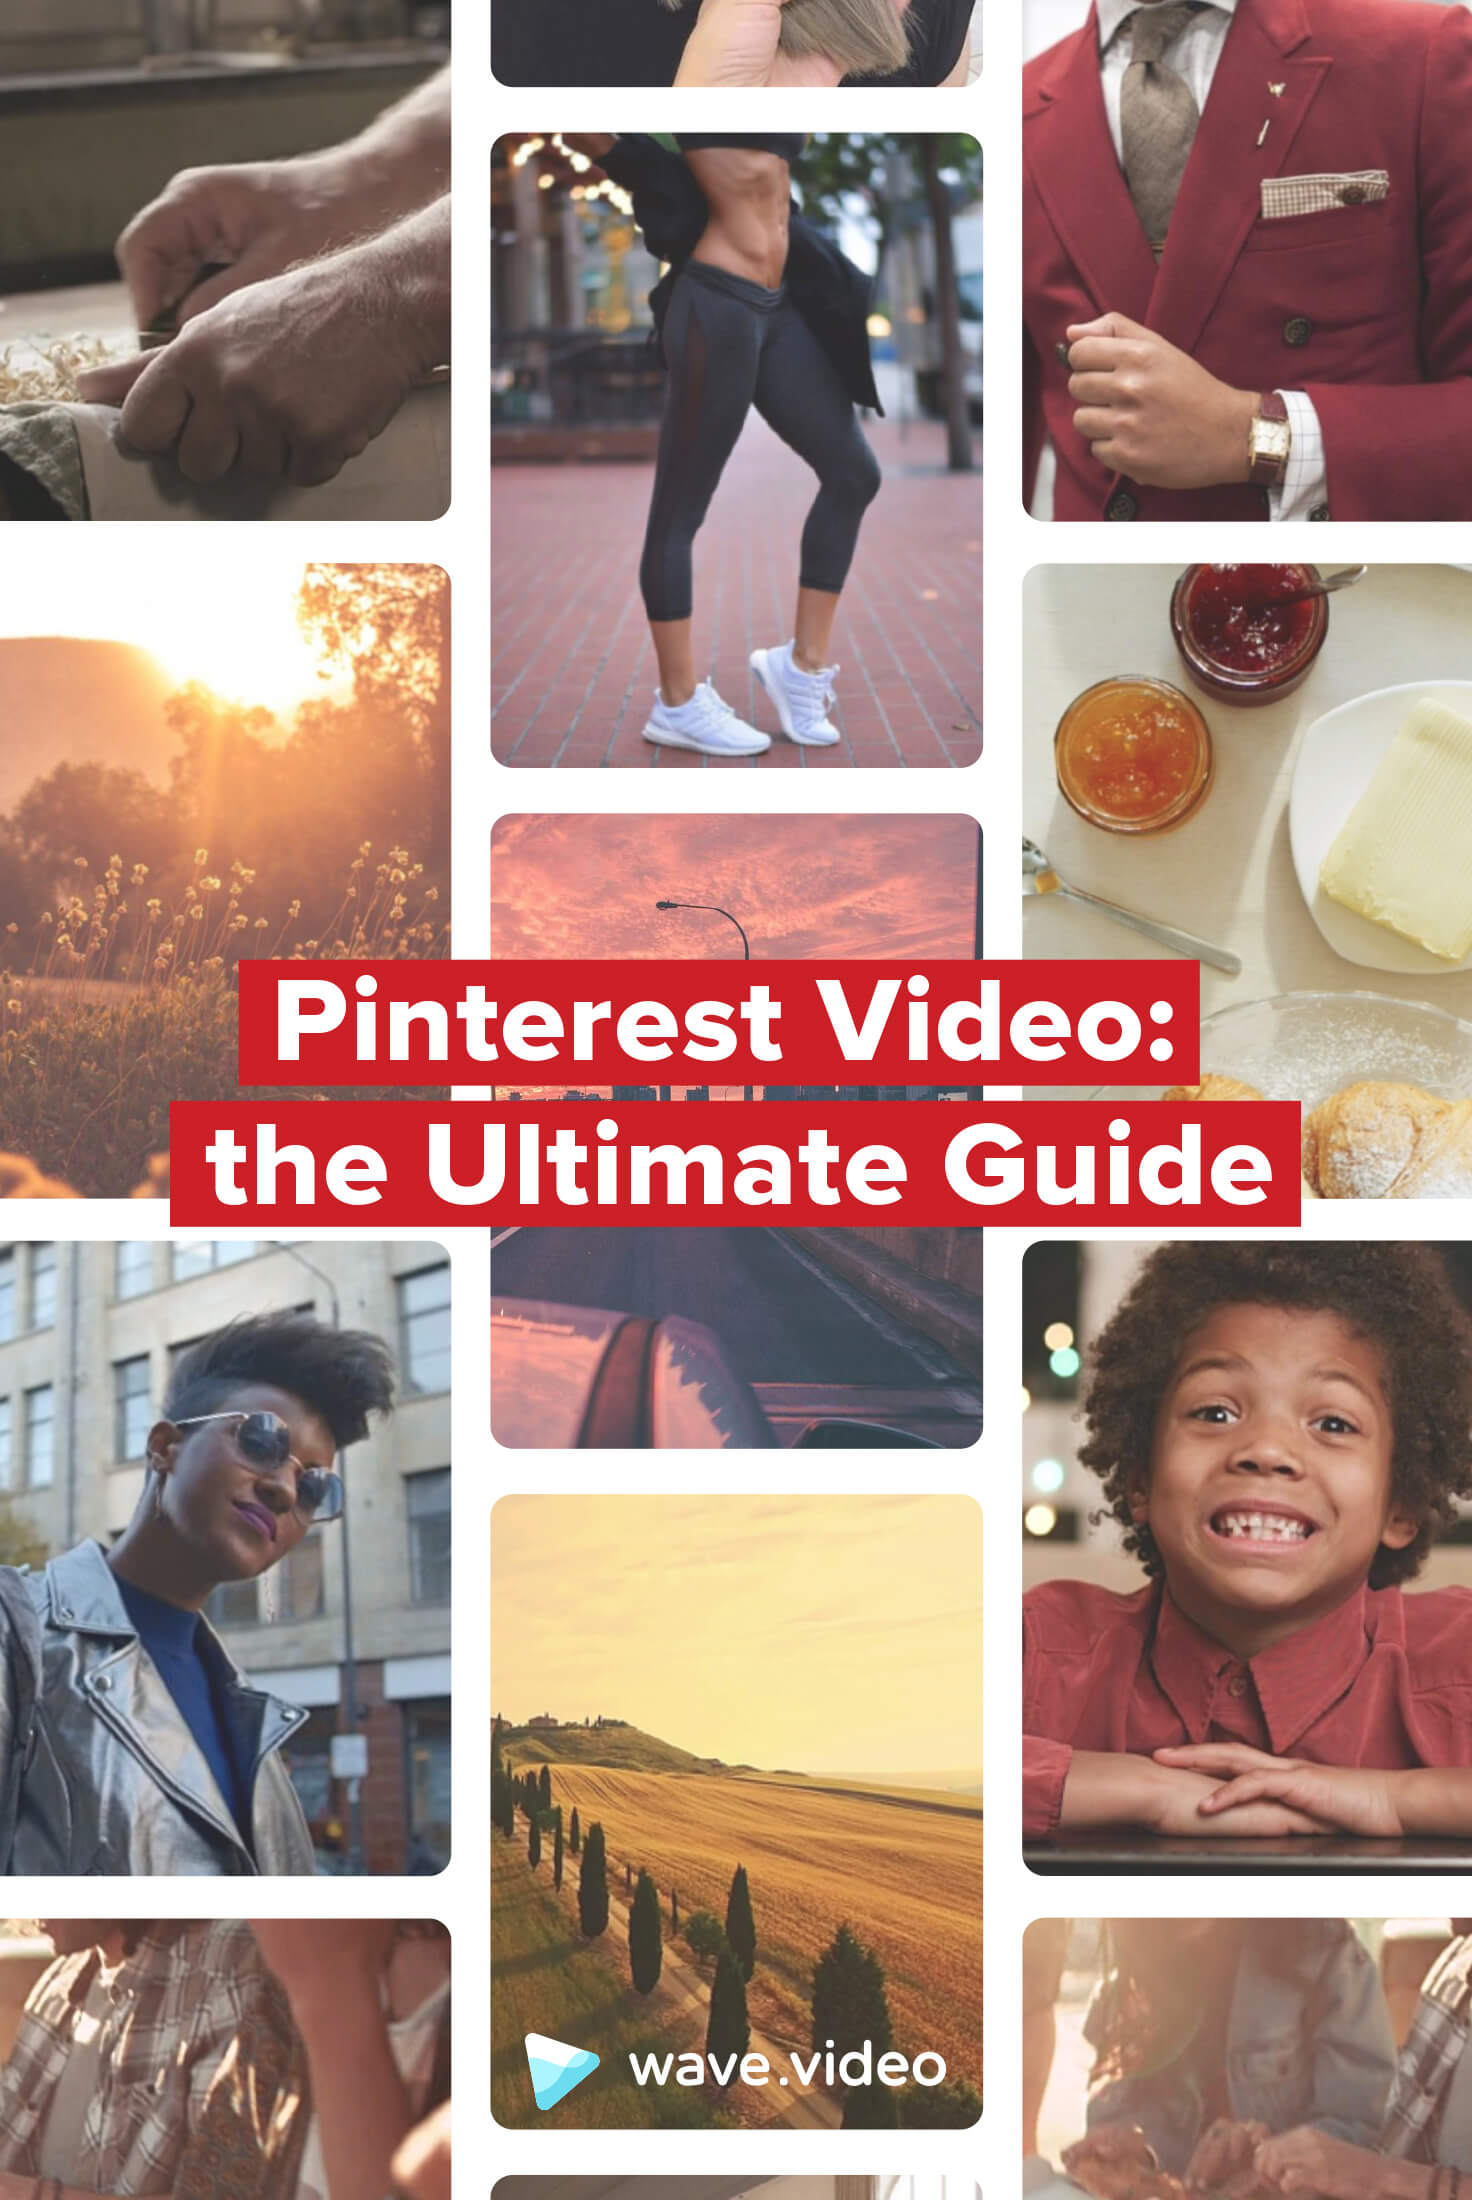 Pinterest Video: the Ultimate Guide